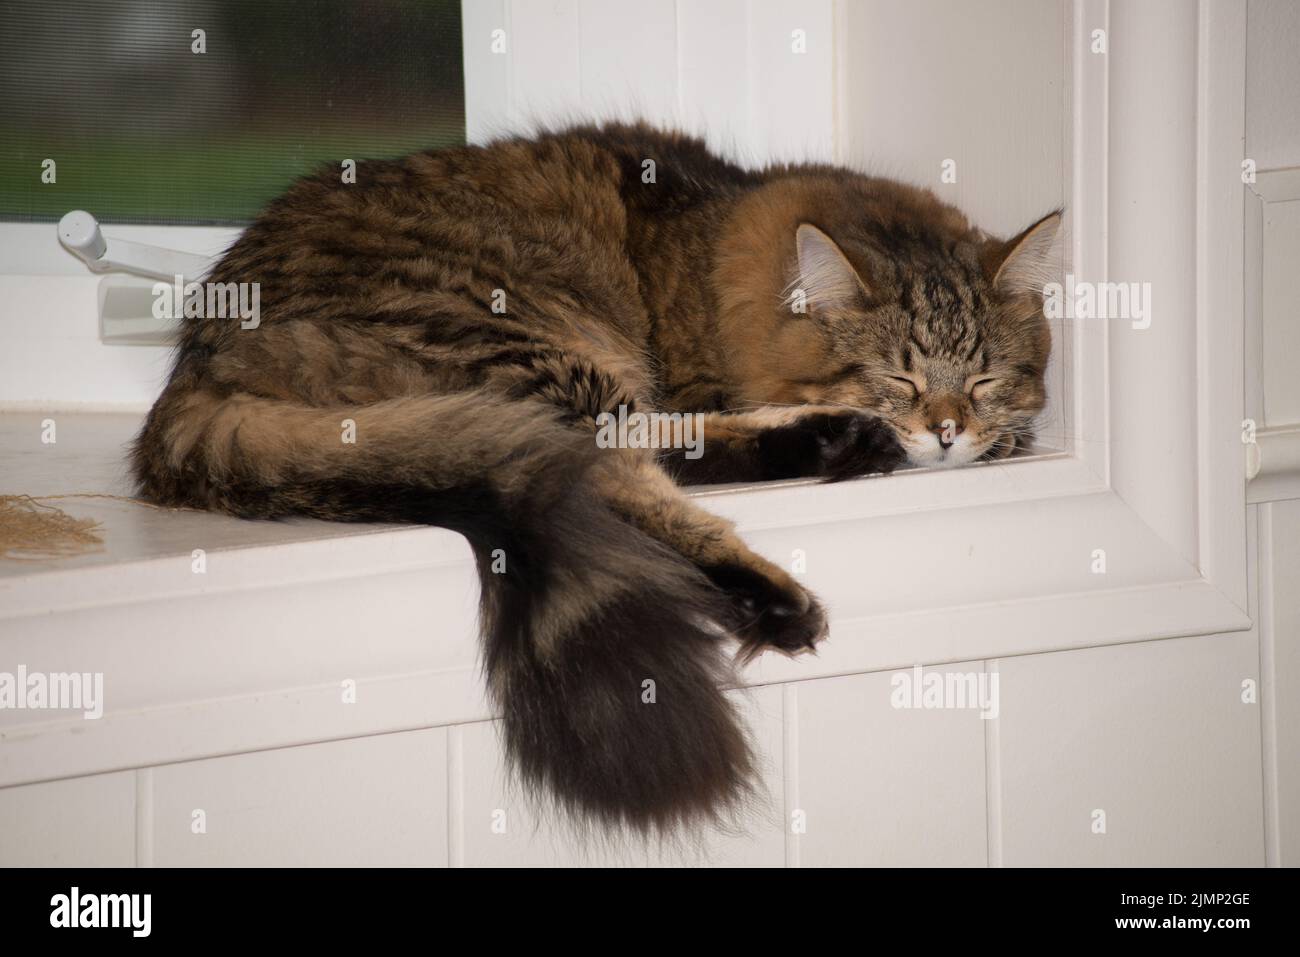 Wookiiee the cat takes a nap in the bay window. Stock Photo